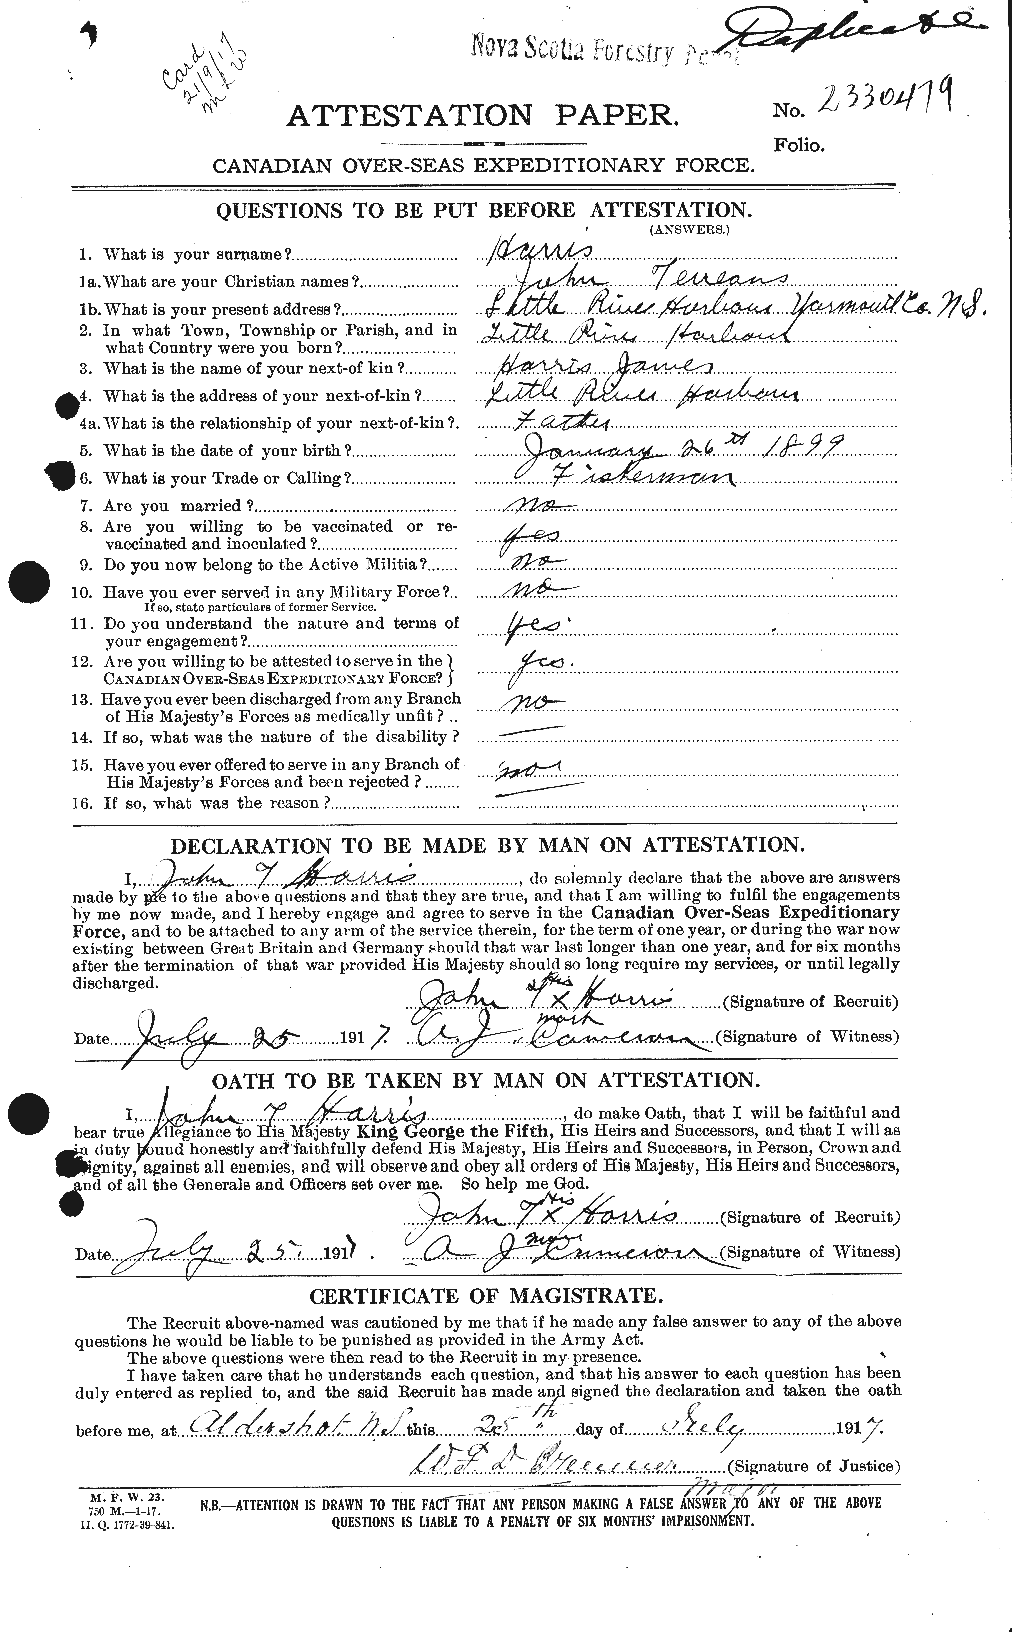 Personnel Records of the First World War - CEF 377282a